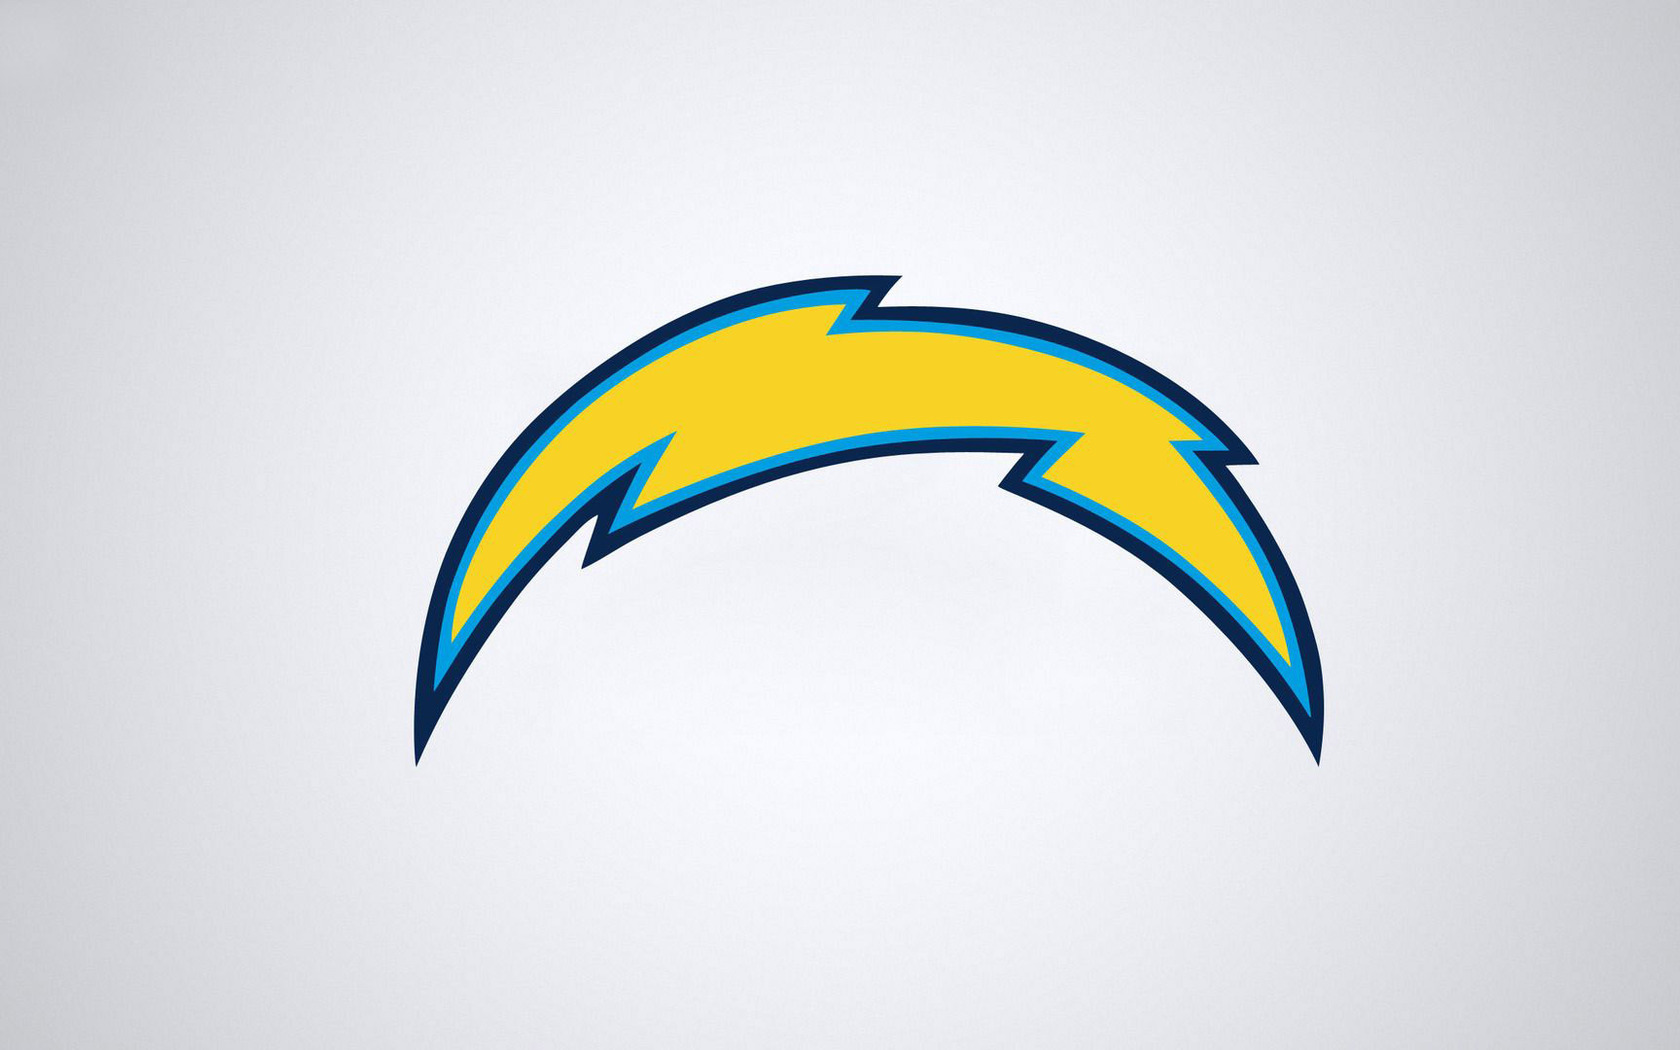 San Diego Chargers wallpaper 18516